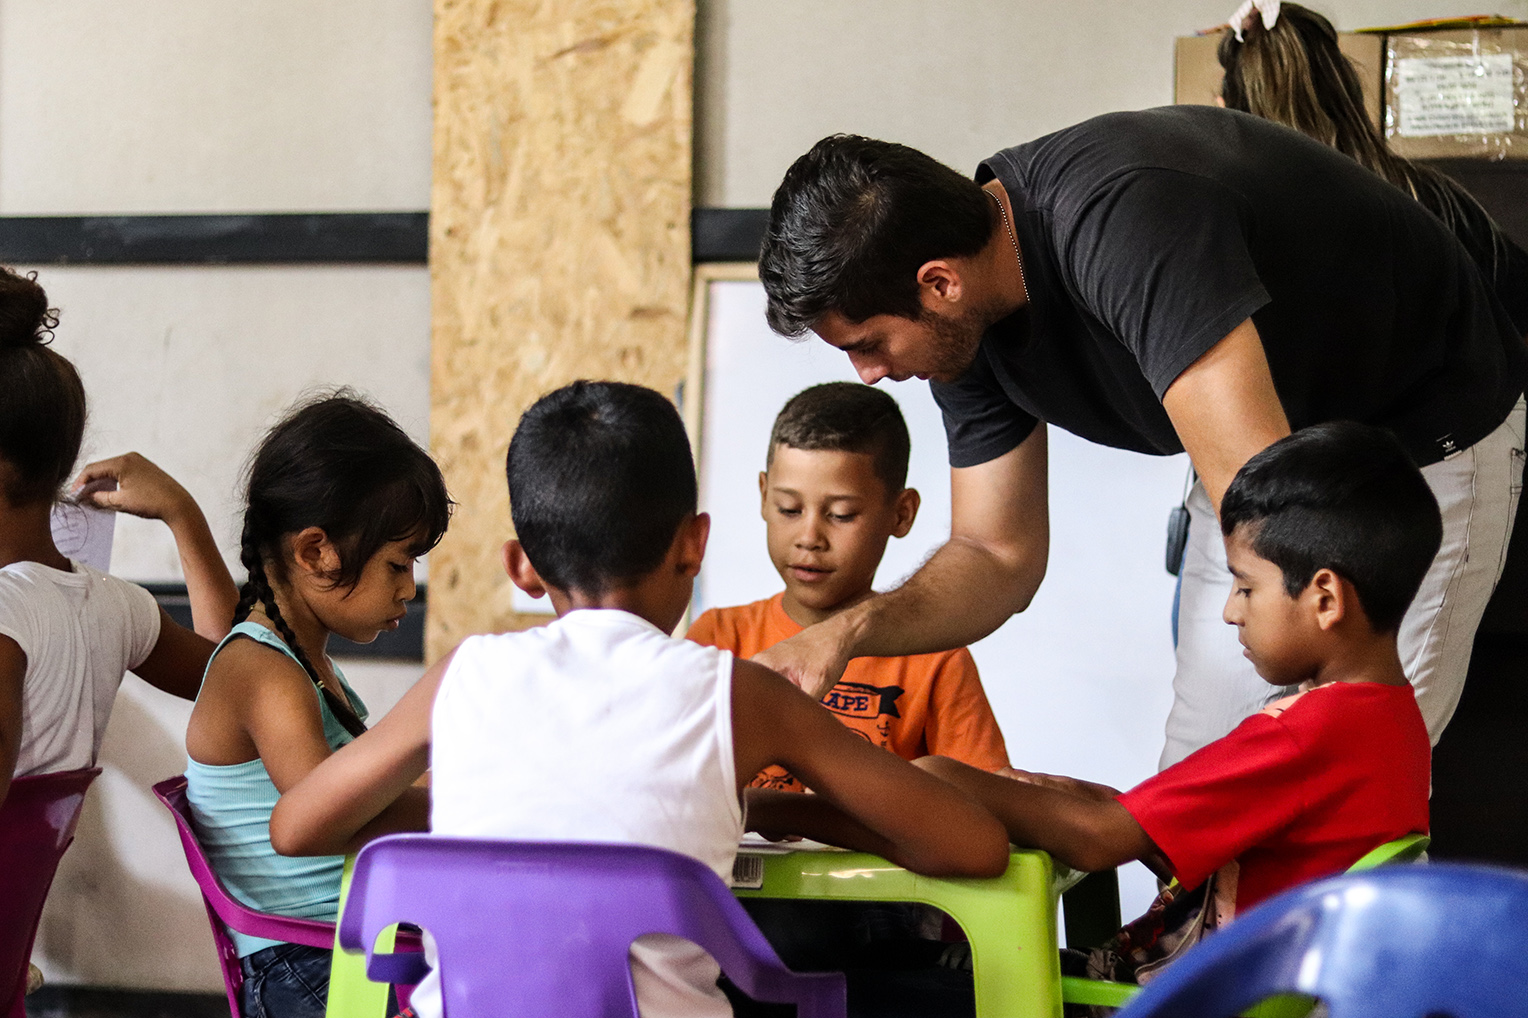 Samaritan’s Purse team members help the children understand Bible lessons and how to apply them to their lives.